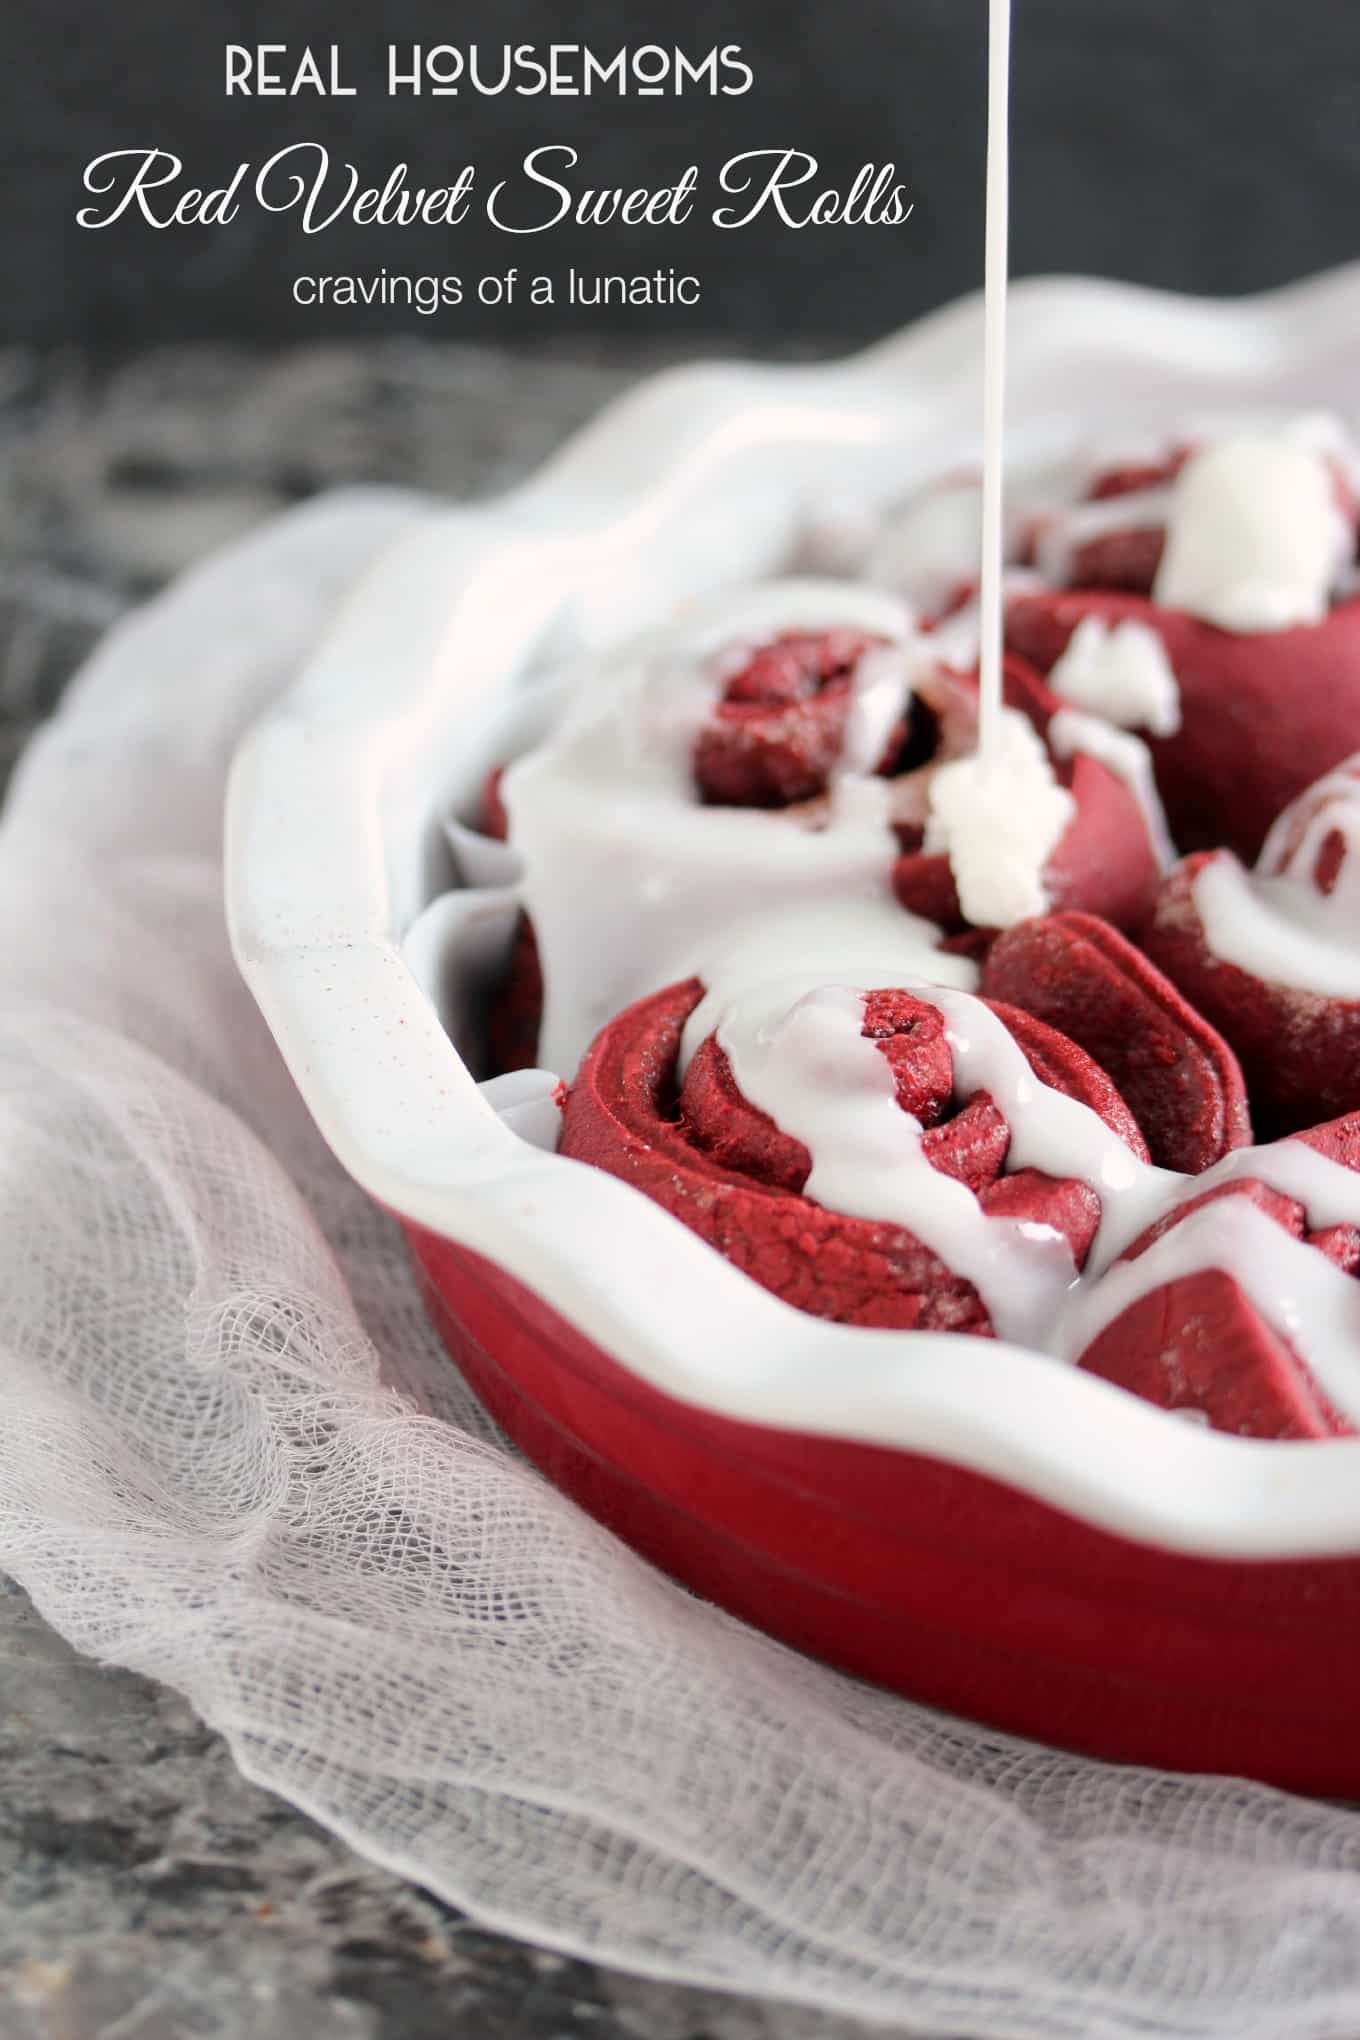 Red Velvet Sweet Rolls for Real Housemoms by Cravings of a Lunatic